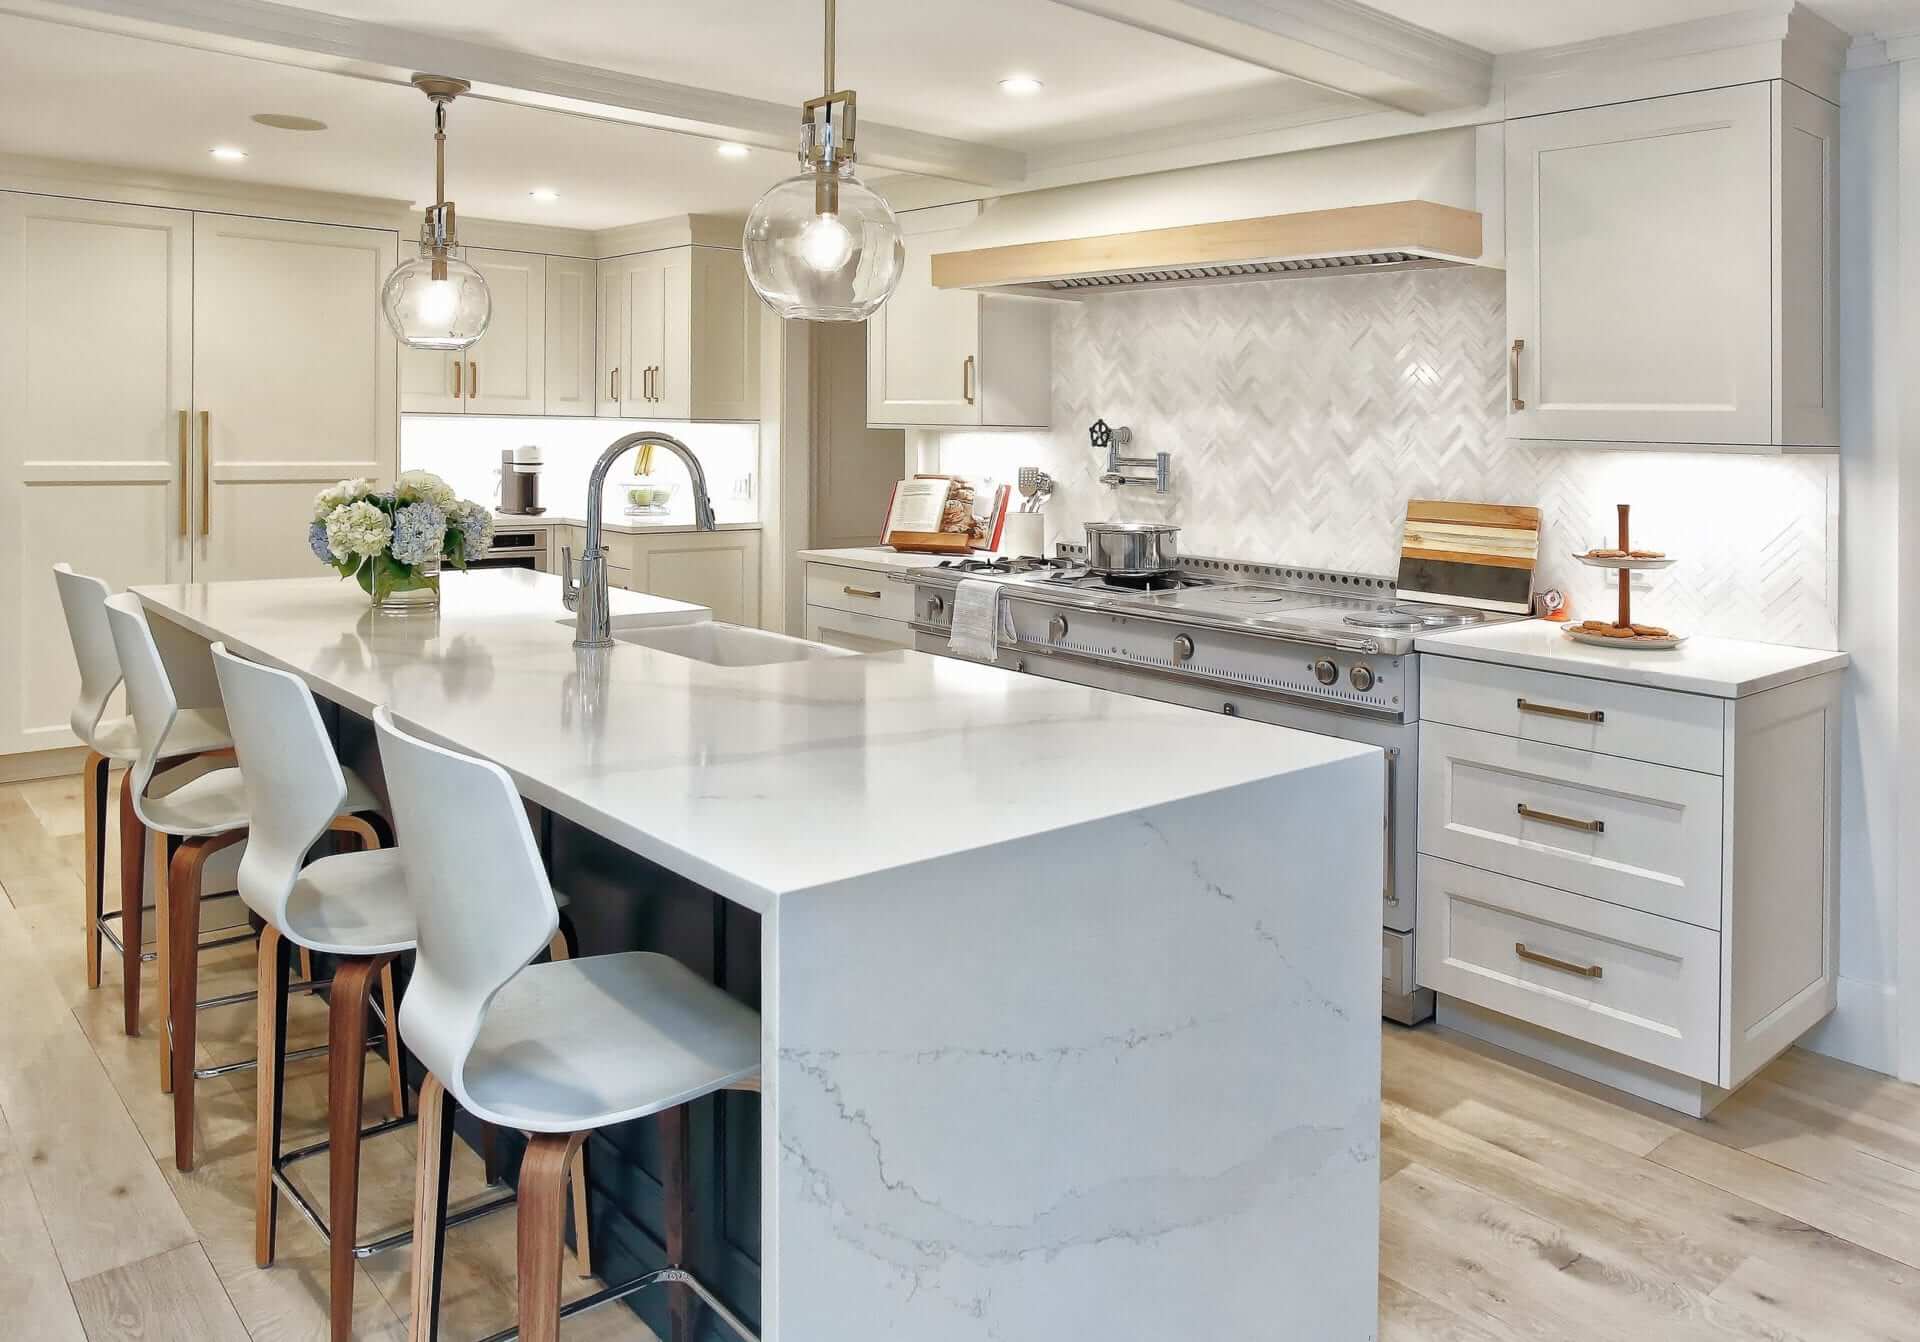 Kitchen features gray veined marble waterfall island, white custom NAC cabinetry, chevron tile backsplash & antique-inspired accents.